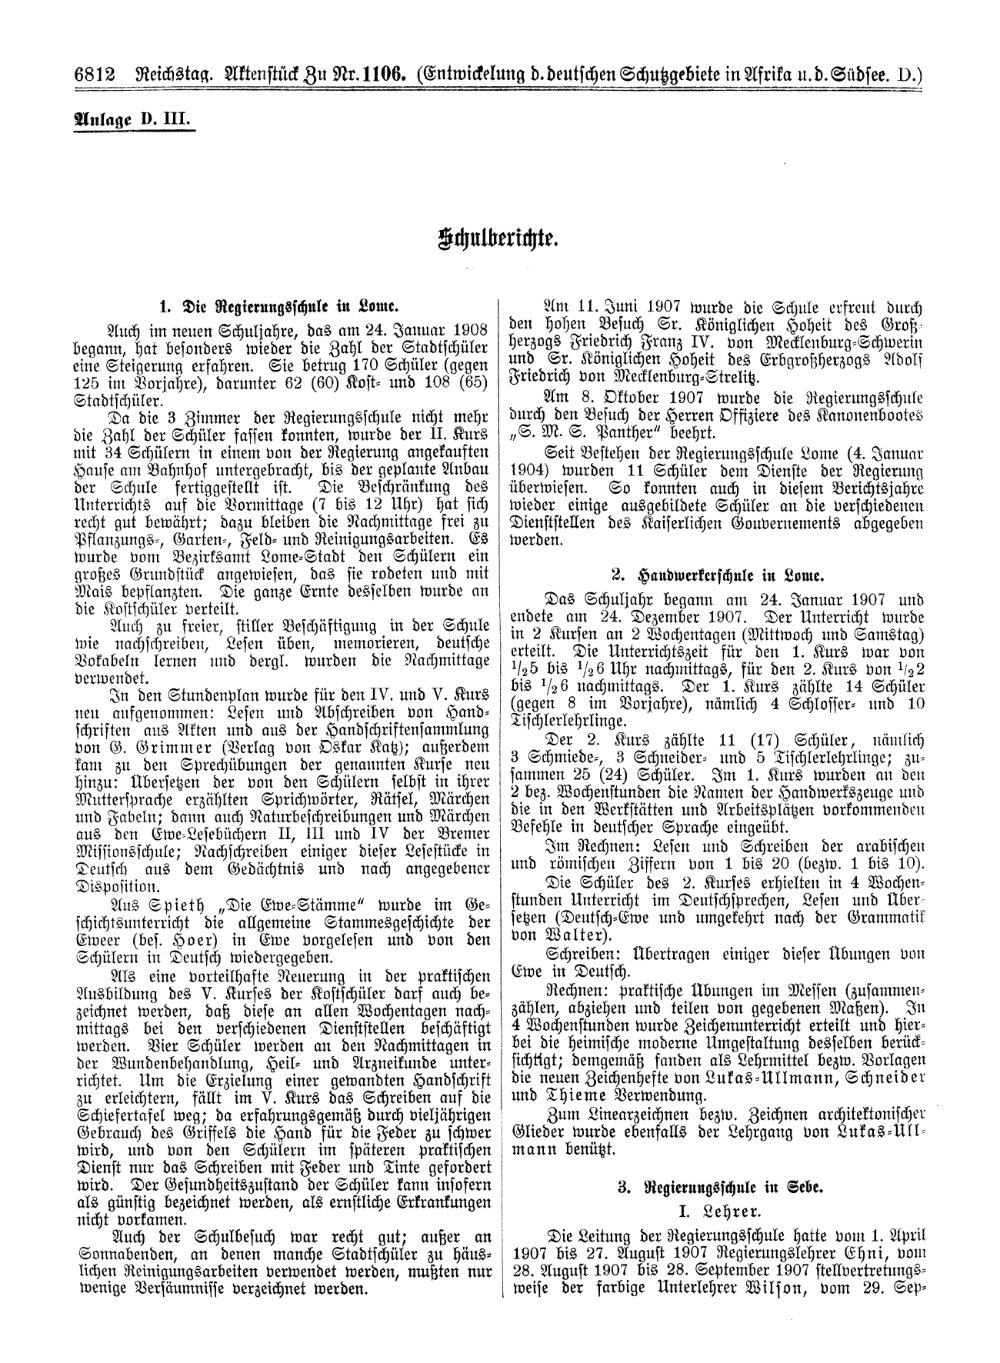 Scan of page 6812